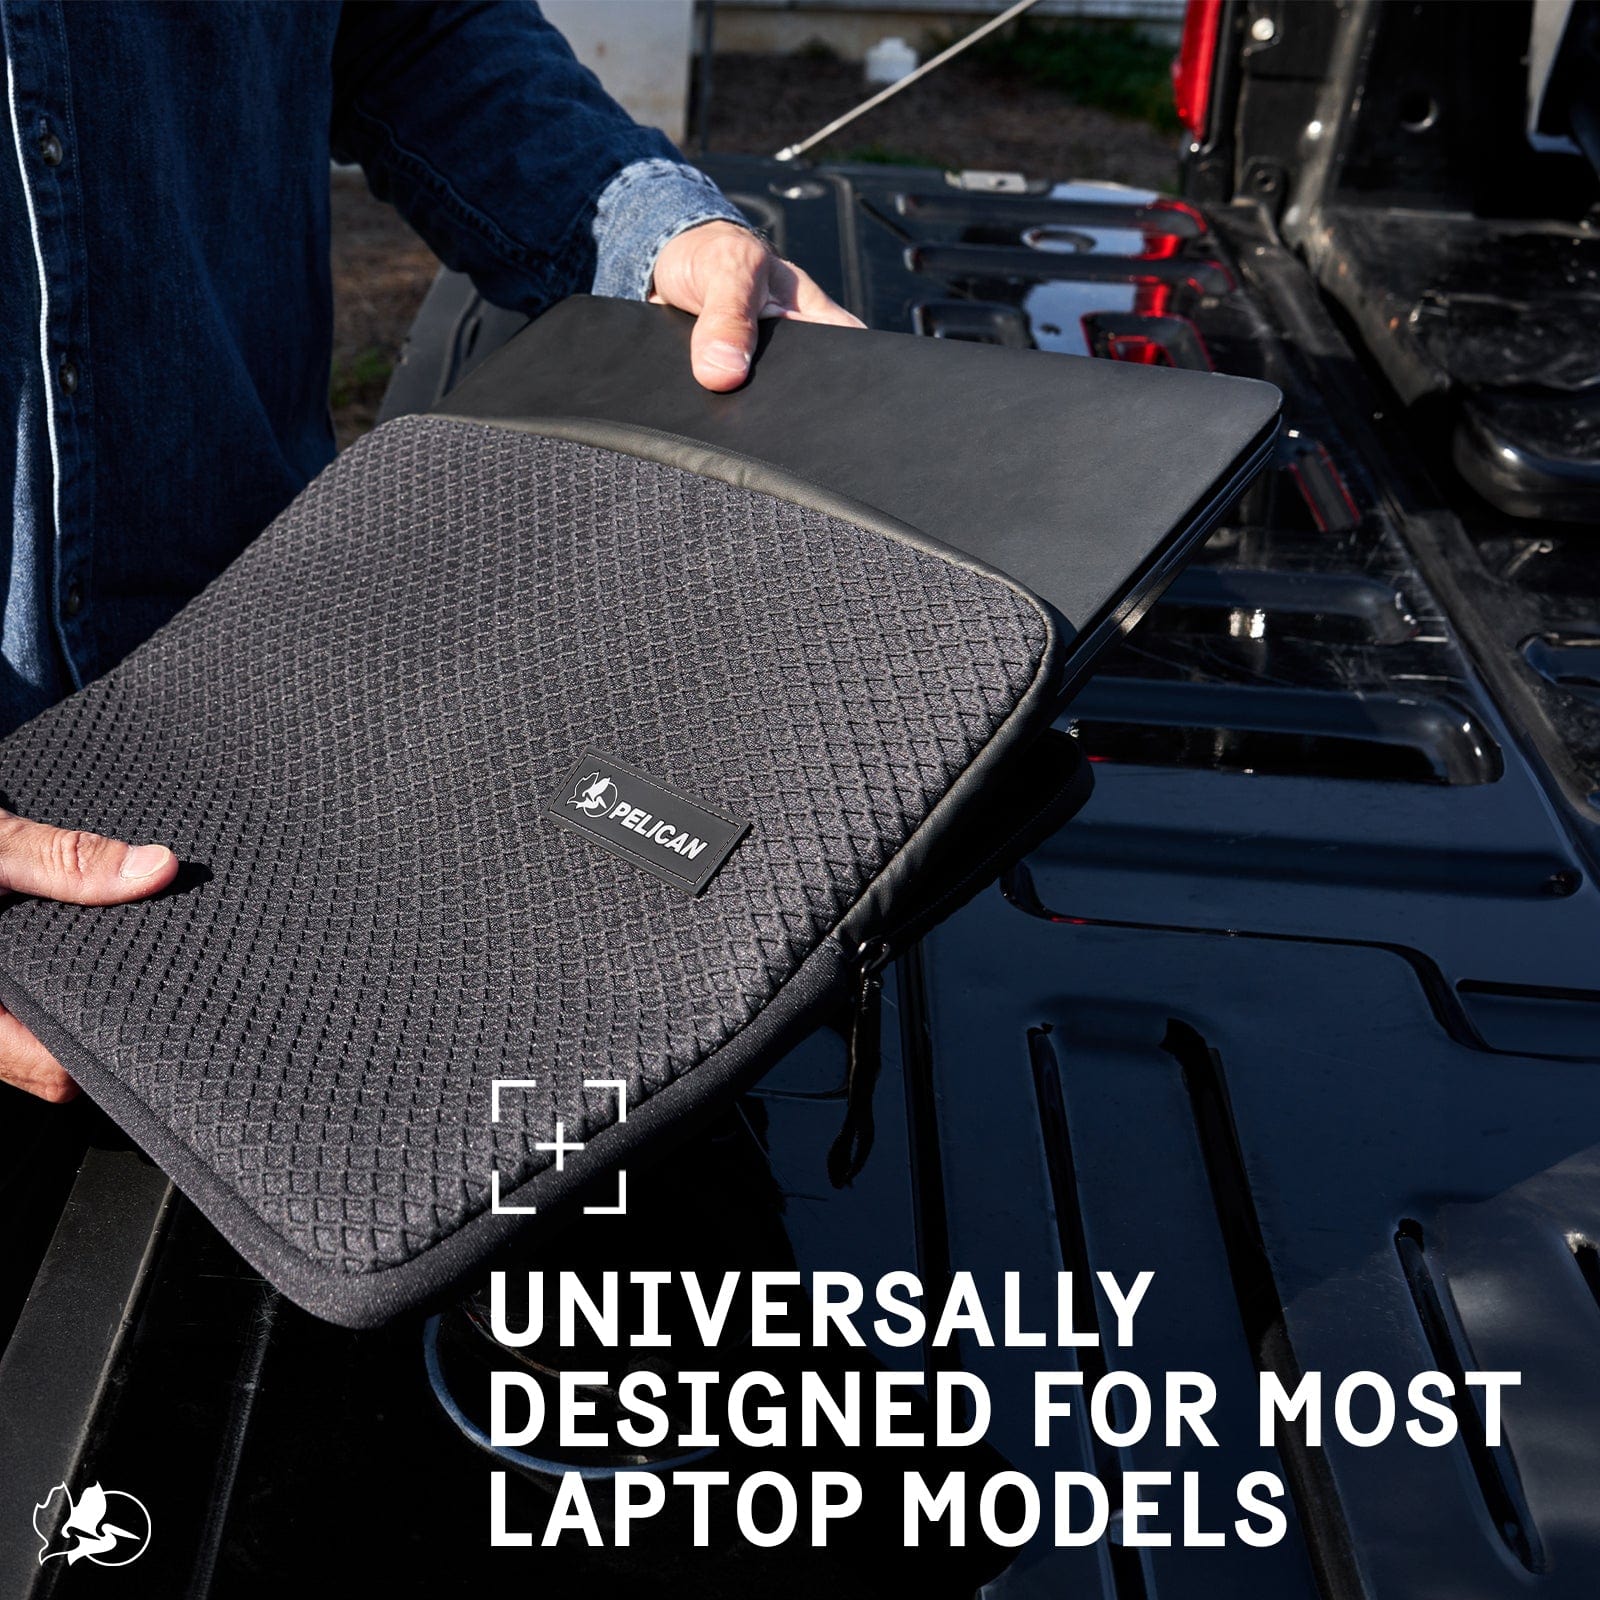 UNIVERSALLY DESIGNED FOR MOST LAPTOP MODELS.